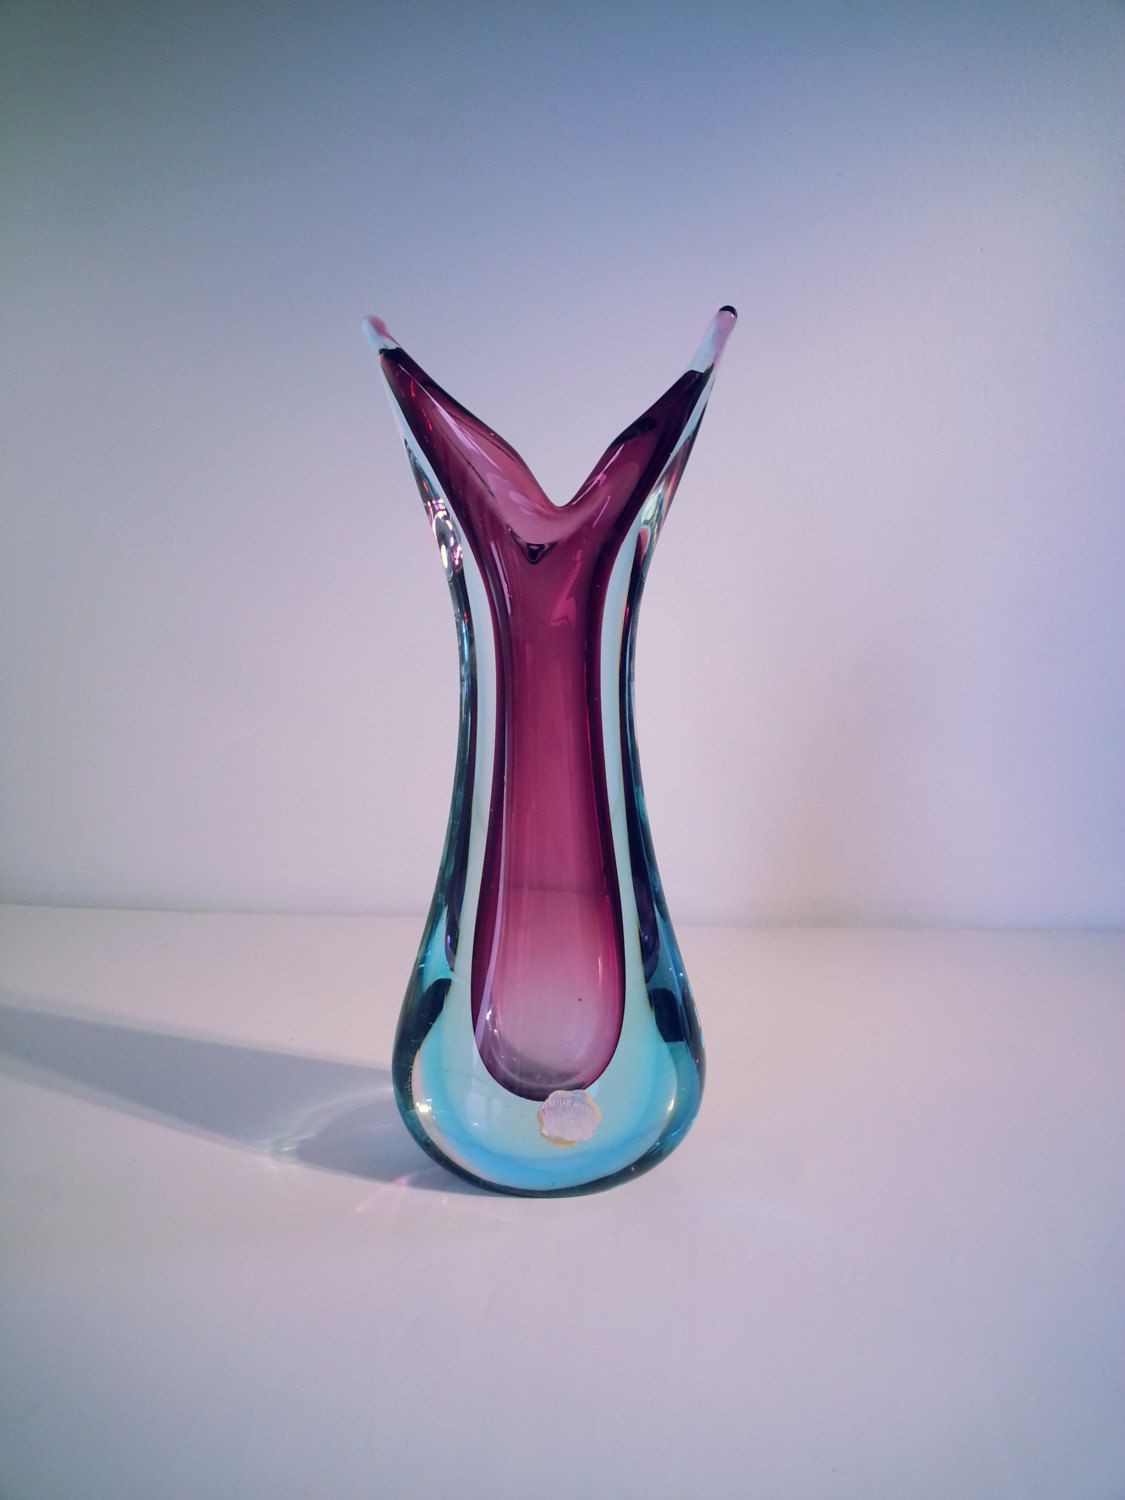 13 Lovable Sea Glass Colored Vases 2024 free download sea glass colored vases of murano sommerso genuine venetian glass 1950s 1960s purple blue in murano sommerso genuine venetian glass 1950s 1960s purple blue glass vase pulled design vase made